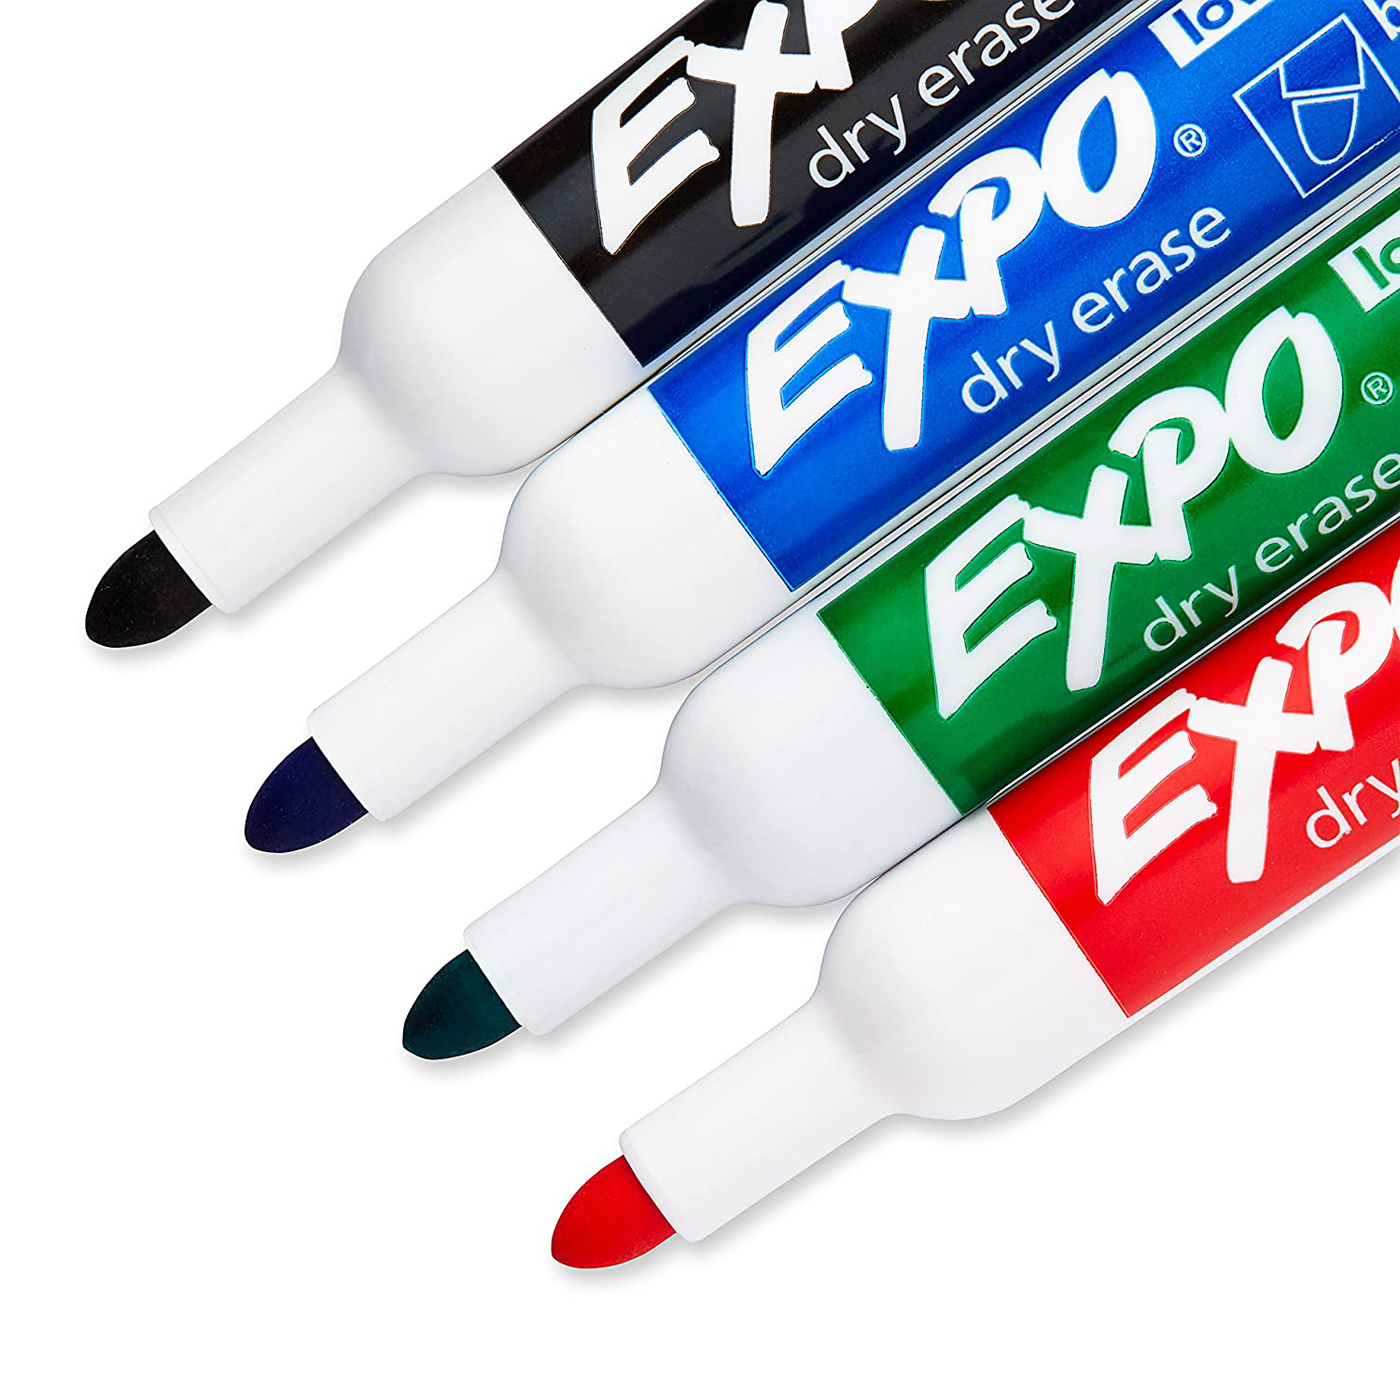 Expo Whiteboard Marker Bullet Tip 4 Assorted Colours